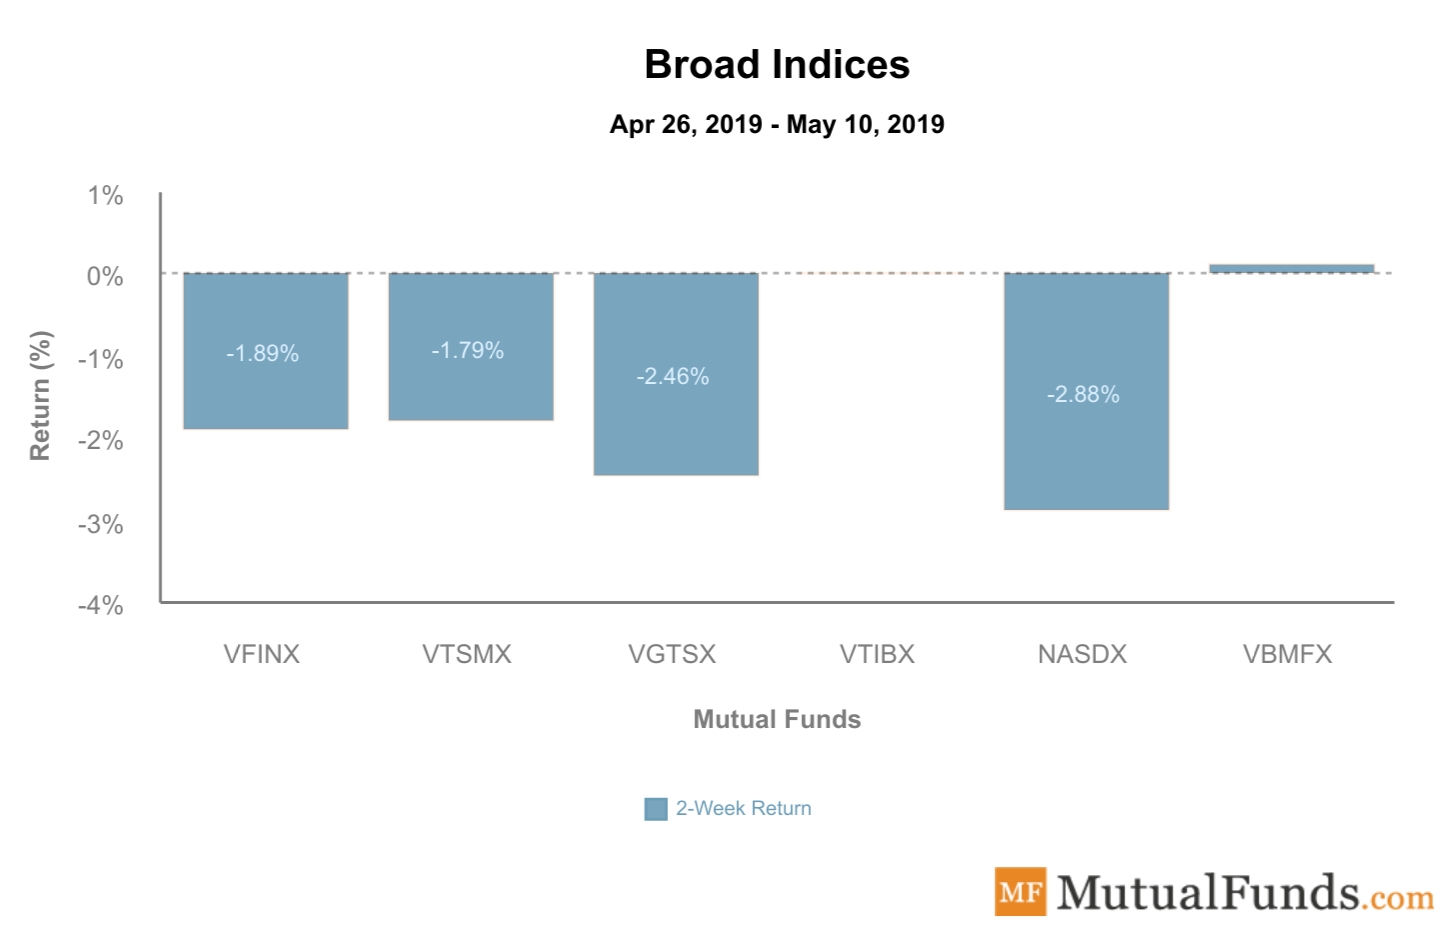 Broad Indices Performance May 14